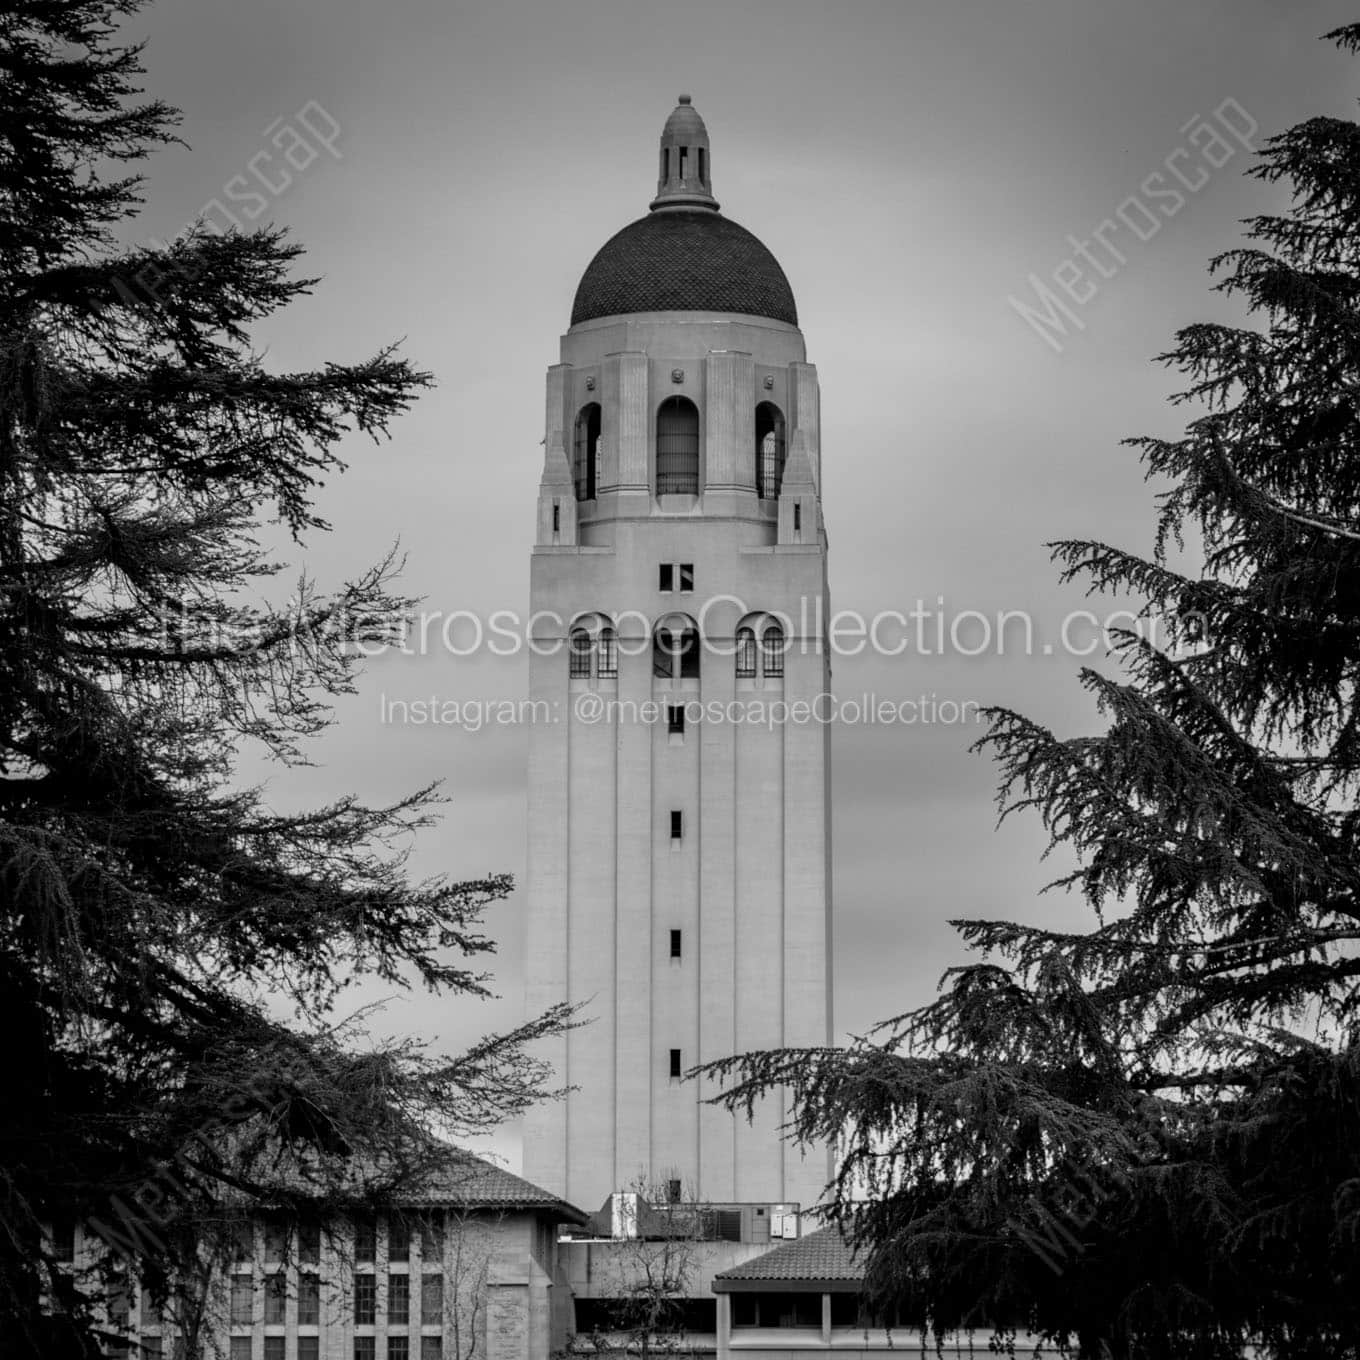 hoover tower stanford campus Black & White Office Art